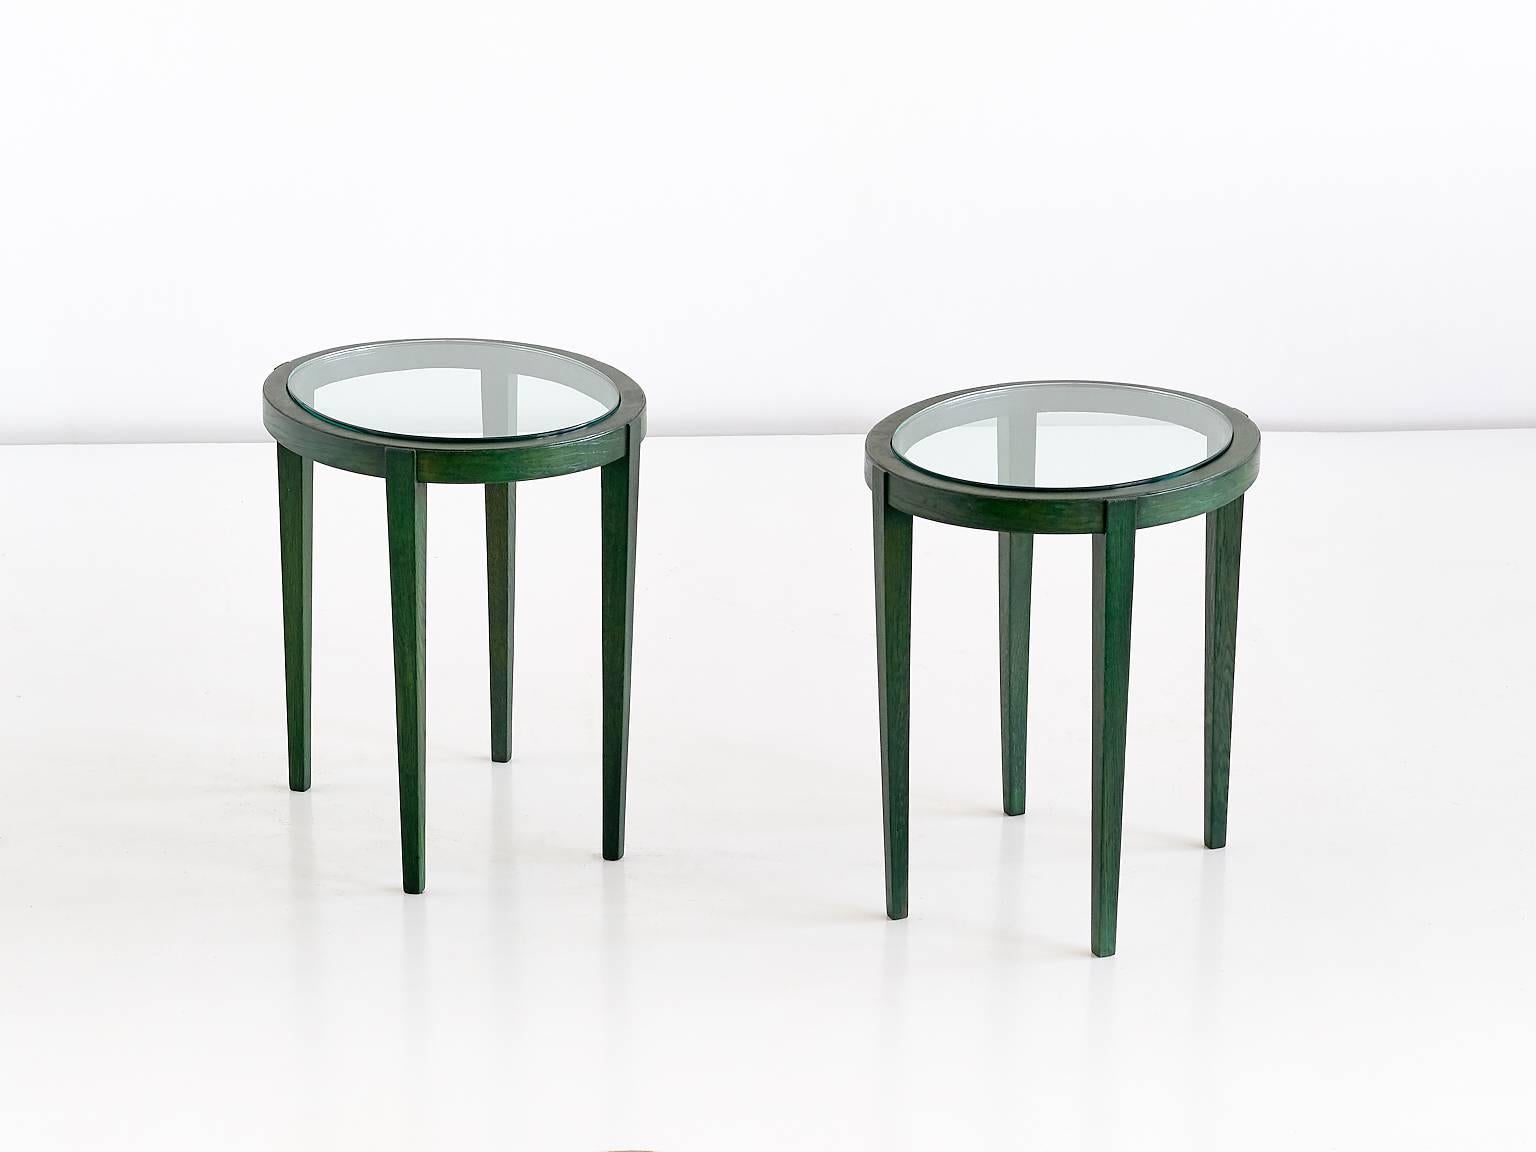 Painted Pair of Green Italian Art Deco Side Tables Designed for a Florentine Residence